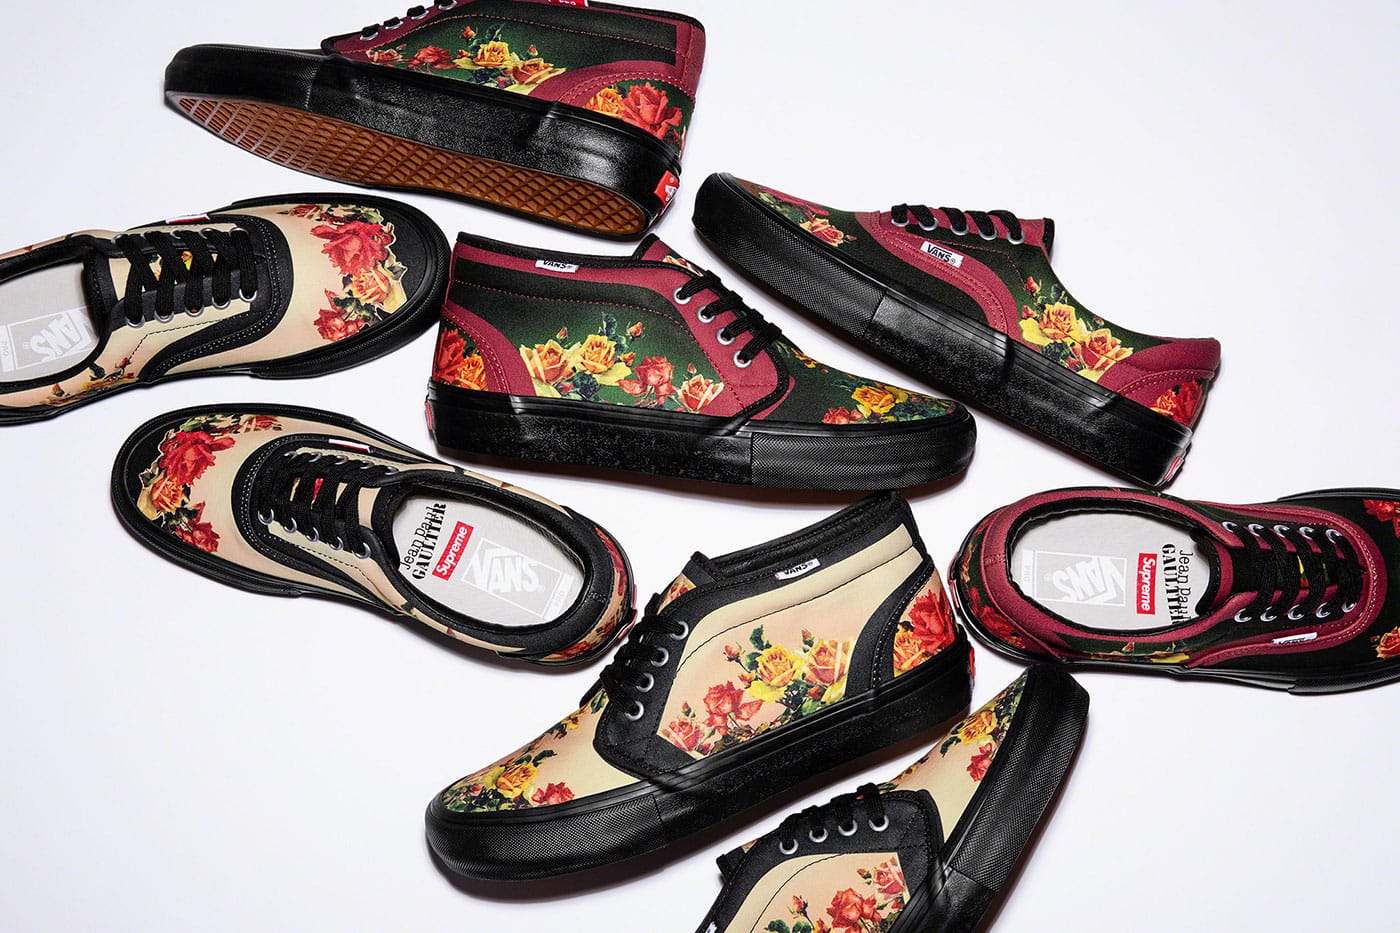 Jean Paul Gaultier x Supreme Prices Revealed | HYPEBEAST